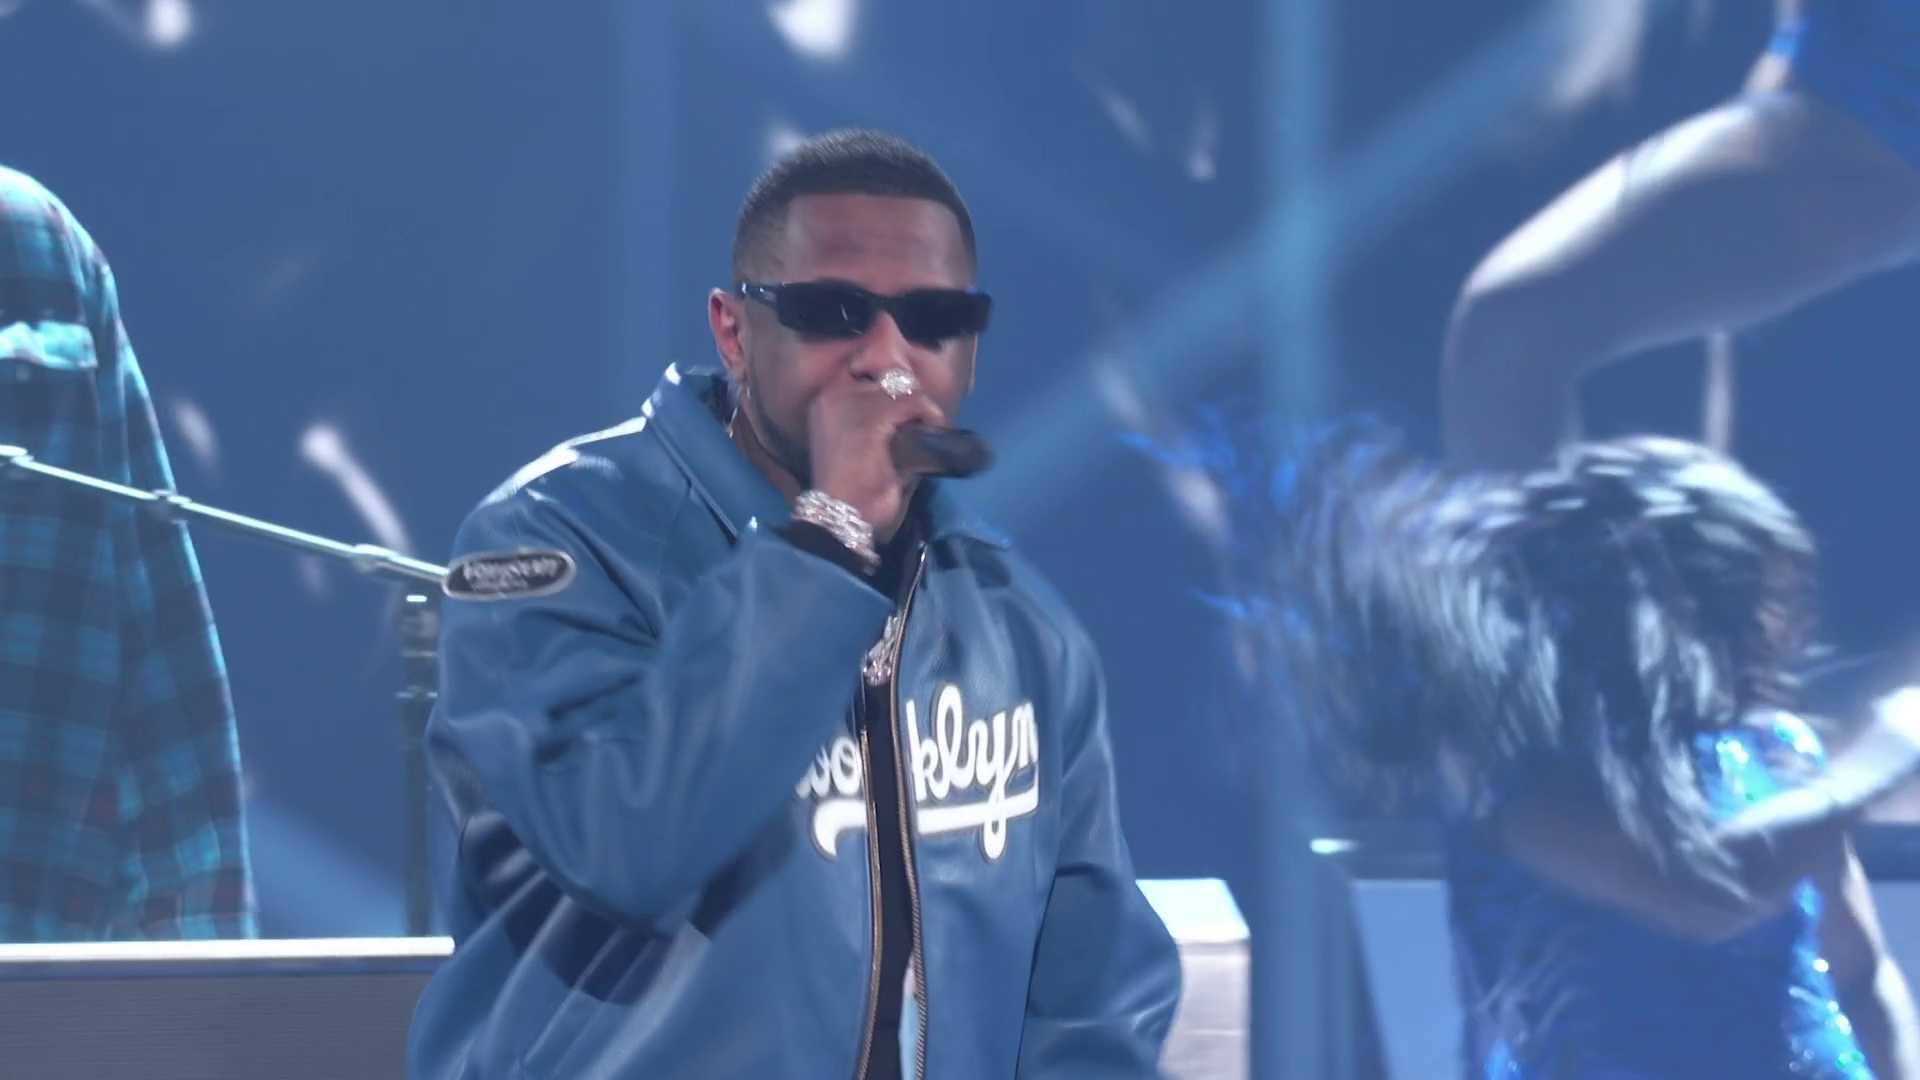 DJ Drama, Fabolous, T.I. and More Perform a Medley of Hits